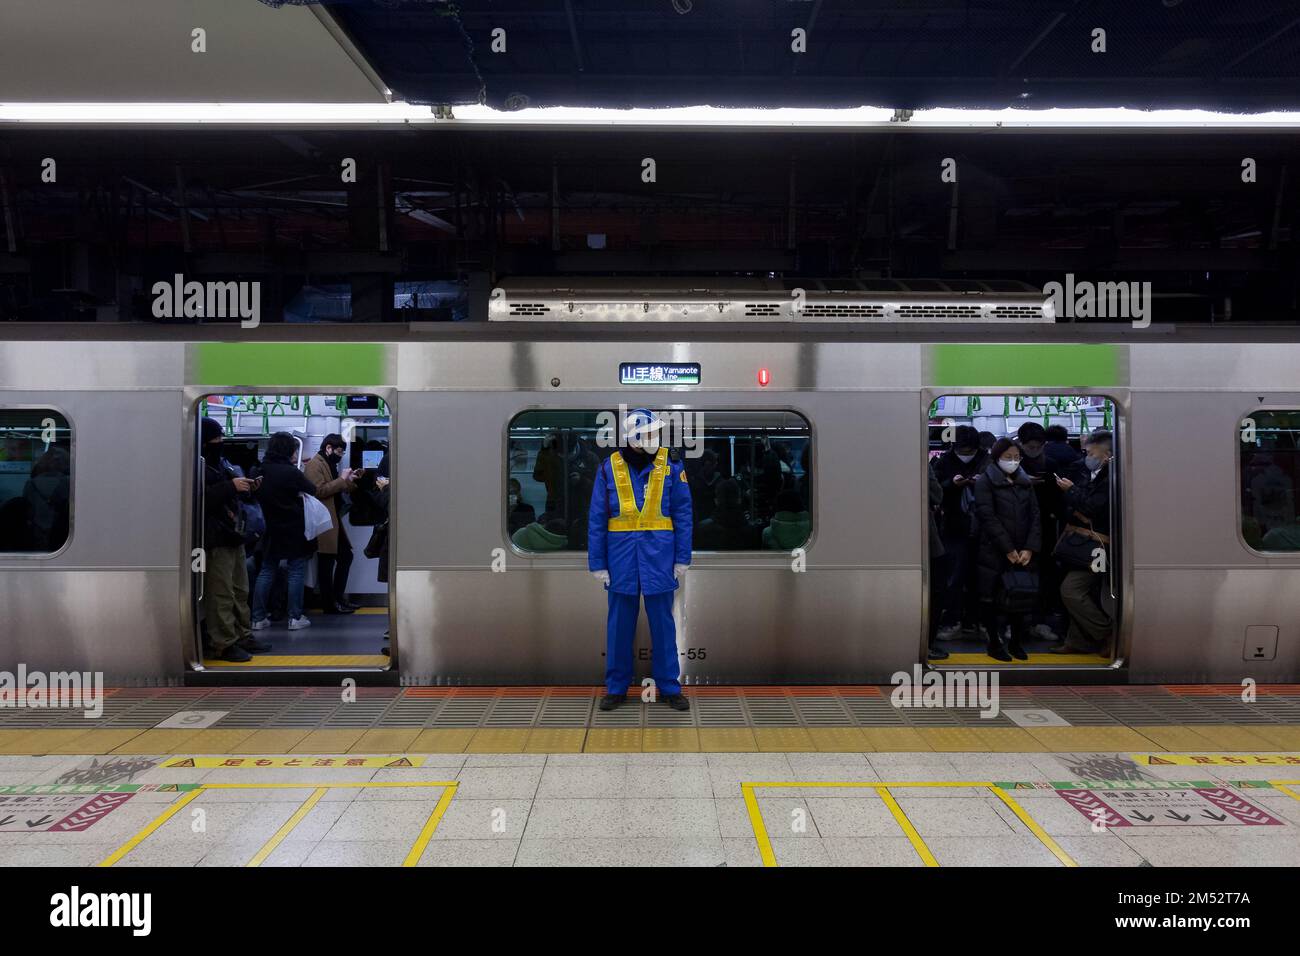 An older Japanese man working as a  security and safety guard on the platform of Shibuya Station  in front of a JR Yamanote Line train, Tokyo, Japan. Stock Photo